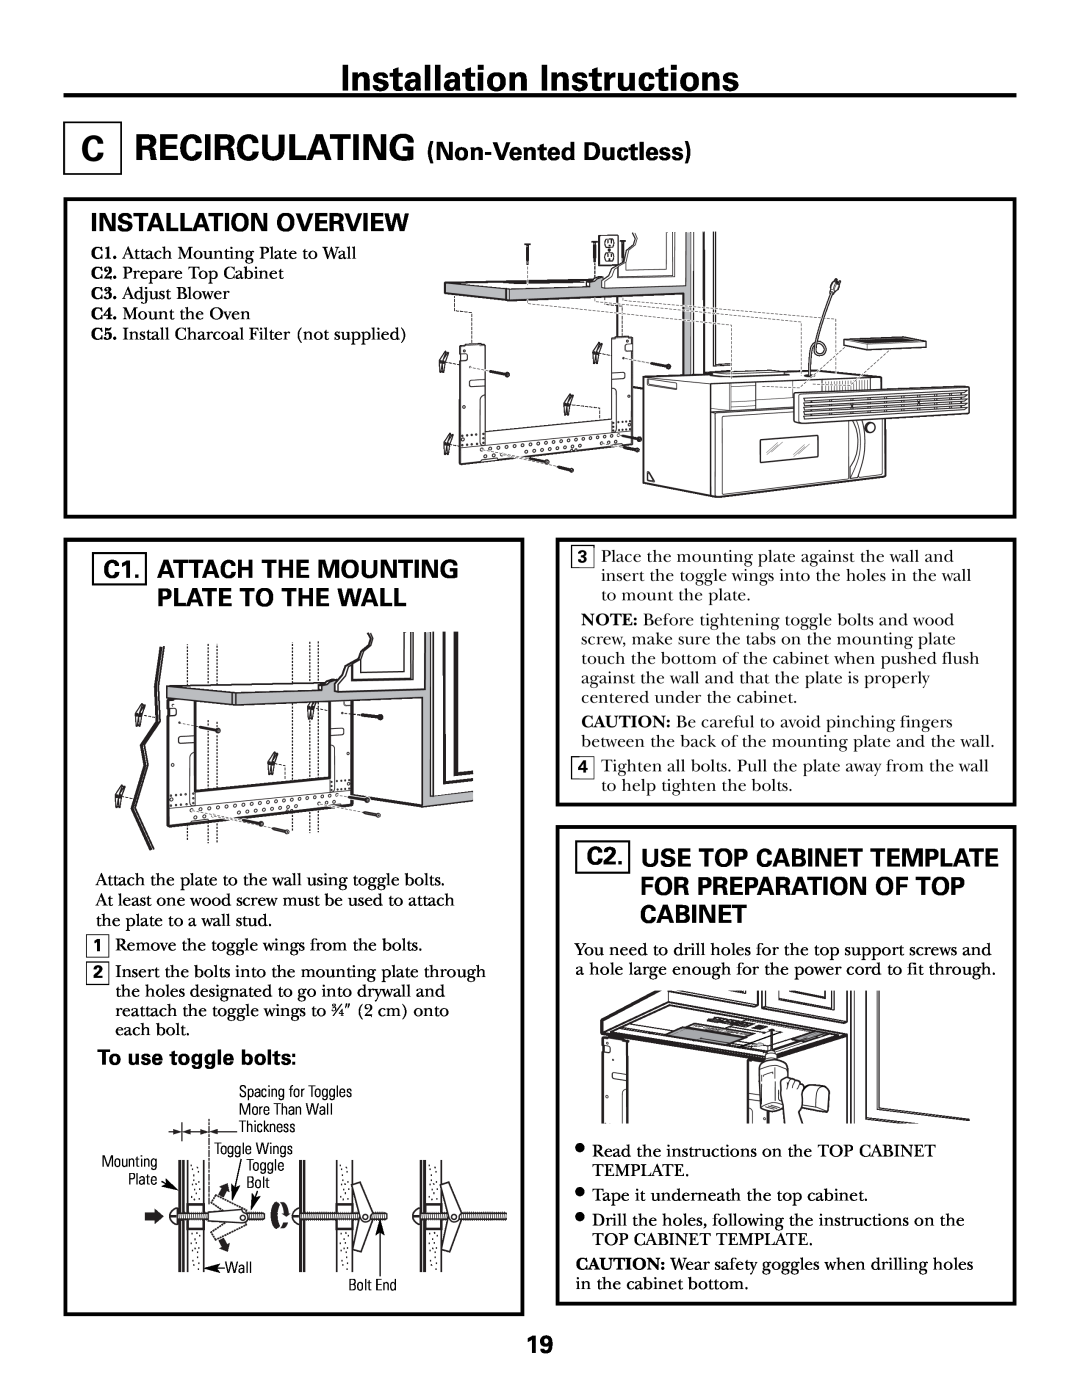 GE JVM1790 RECIRCULATING Non-Vented Ductless, C1. ATTACH THE MOUNTING PLATE TO THE WALL, Installation Instructions 